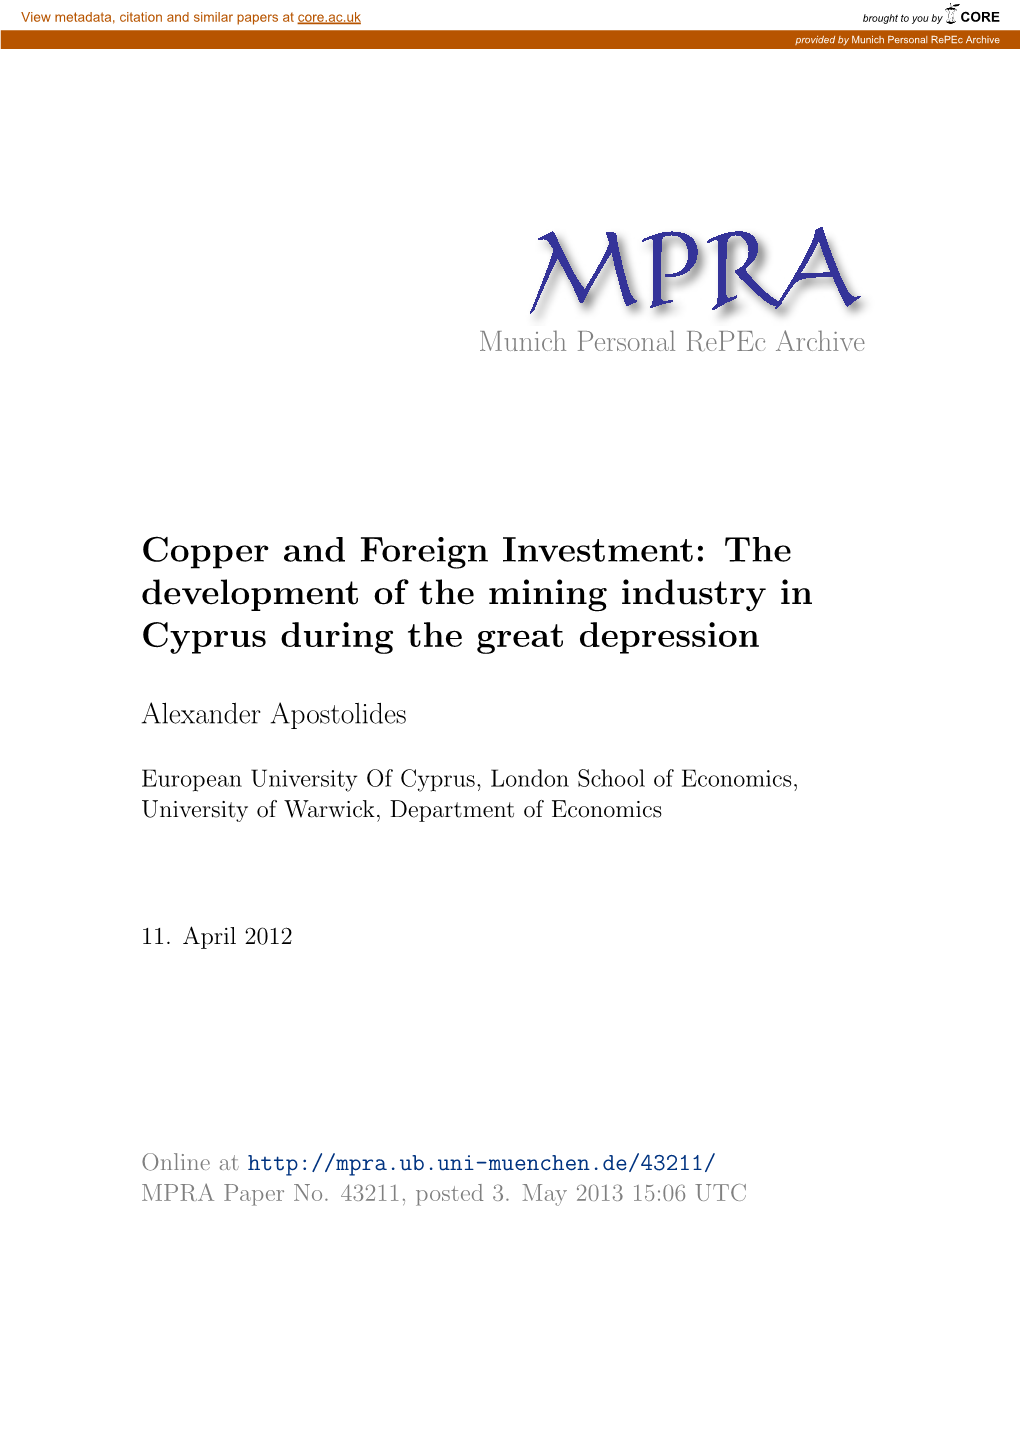 Copper and Foreign Investment: the Development of the Mining Industry in Cyprus During the Great Depression